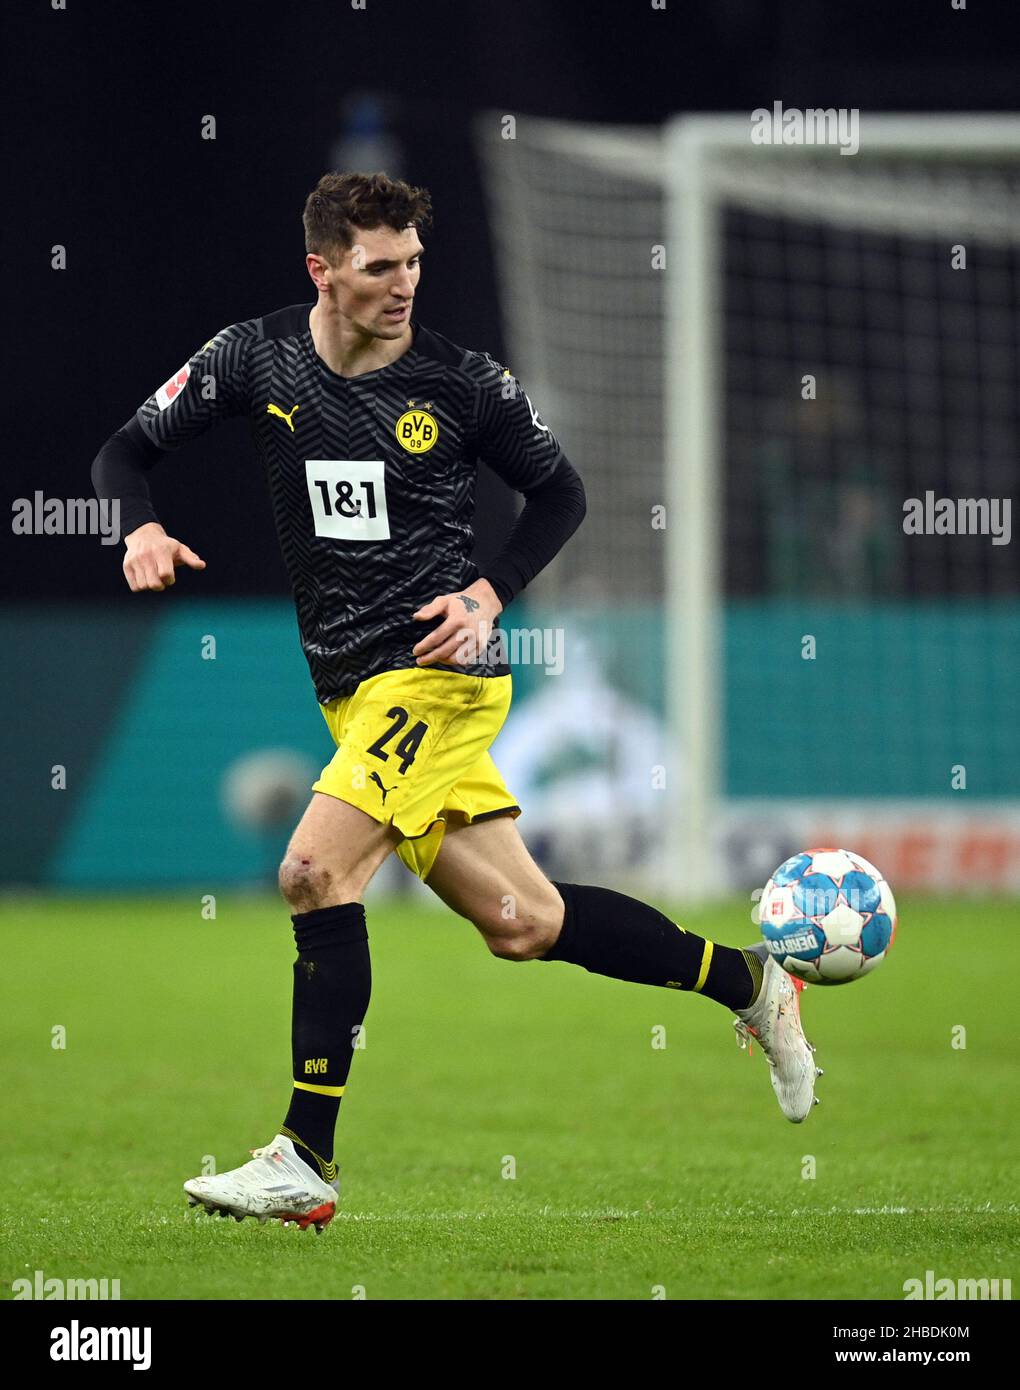 Berlin, Germany. 18th Dec, 2021. Football: Bundesliga, Hertha BSC - Borussia Dortmund, Matchday 17 at the Olympiastadion. Dortmund's Thomas Meunier in action. Credit: Soeren Stache/dpa-Zentralbild/dpa - IMPORTANT NOTE: In accordance with the regulations of the DFL Deutsche Fußball Liga and/or the DFB Deutscher Fußball-Bund, it is prohibited to use or have used photographs taken in the stadium and/or of the match in the form of sequence pictures and/or video-like photo series./dpa/Alamy Live News Stock Photo